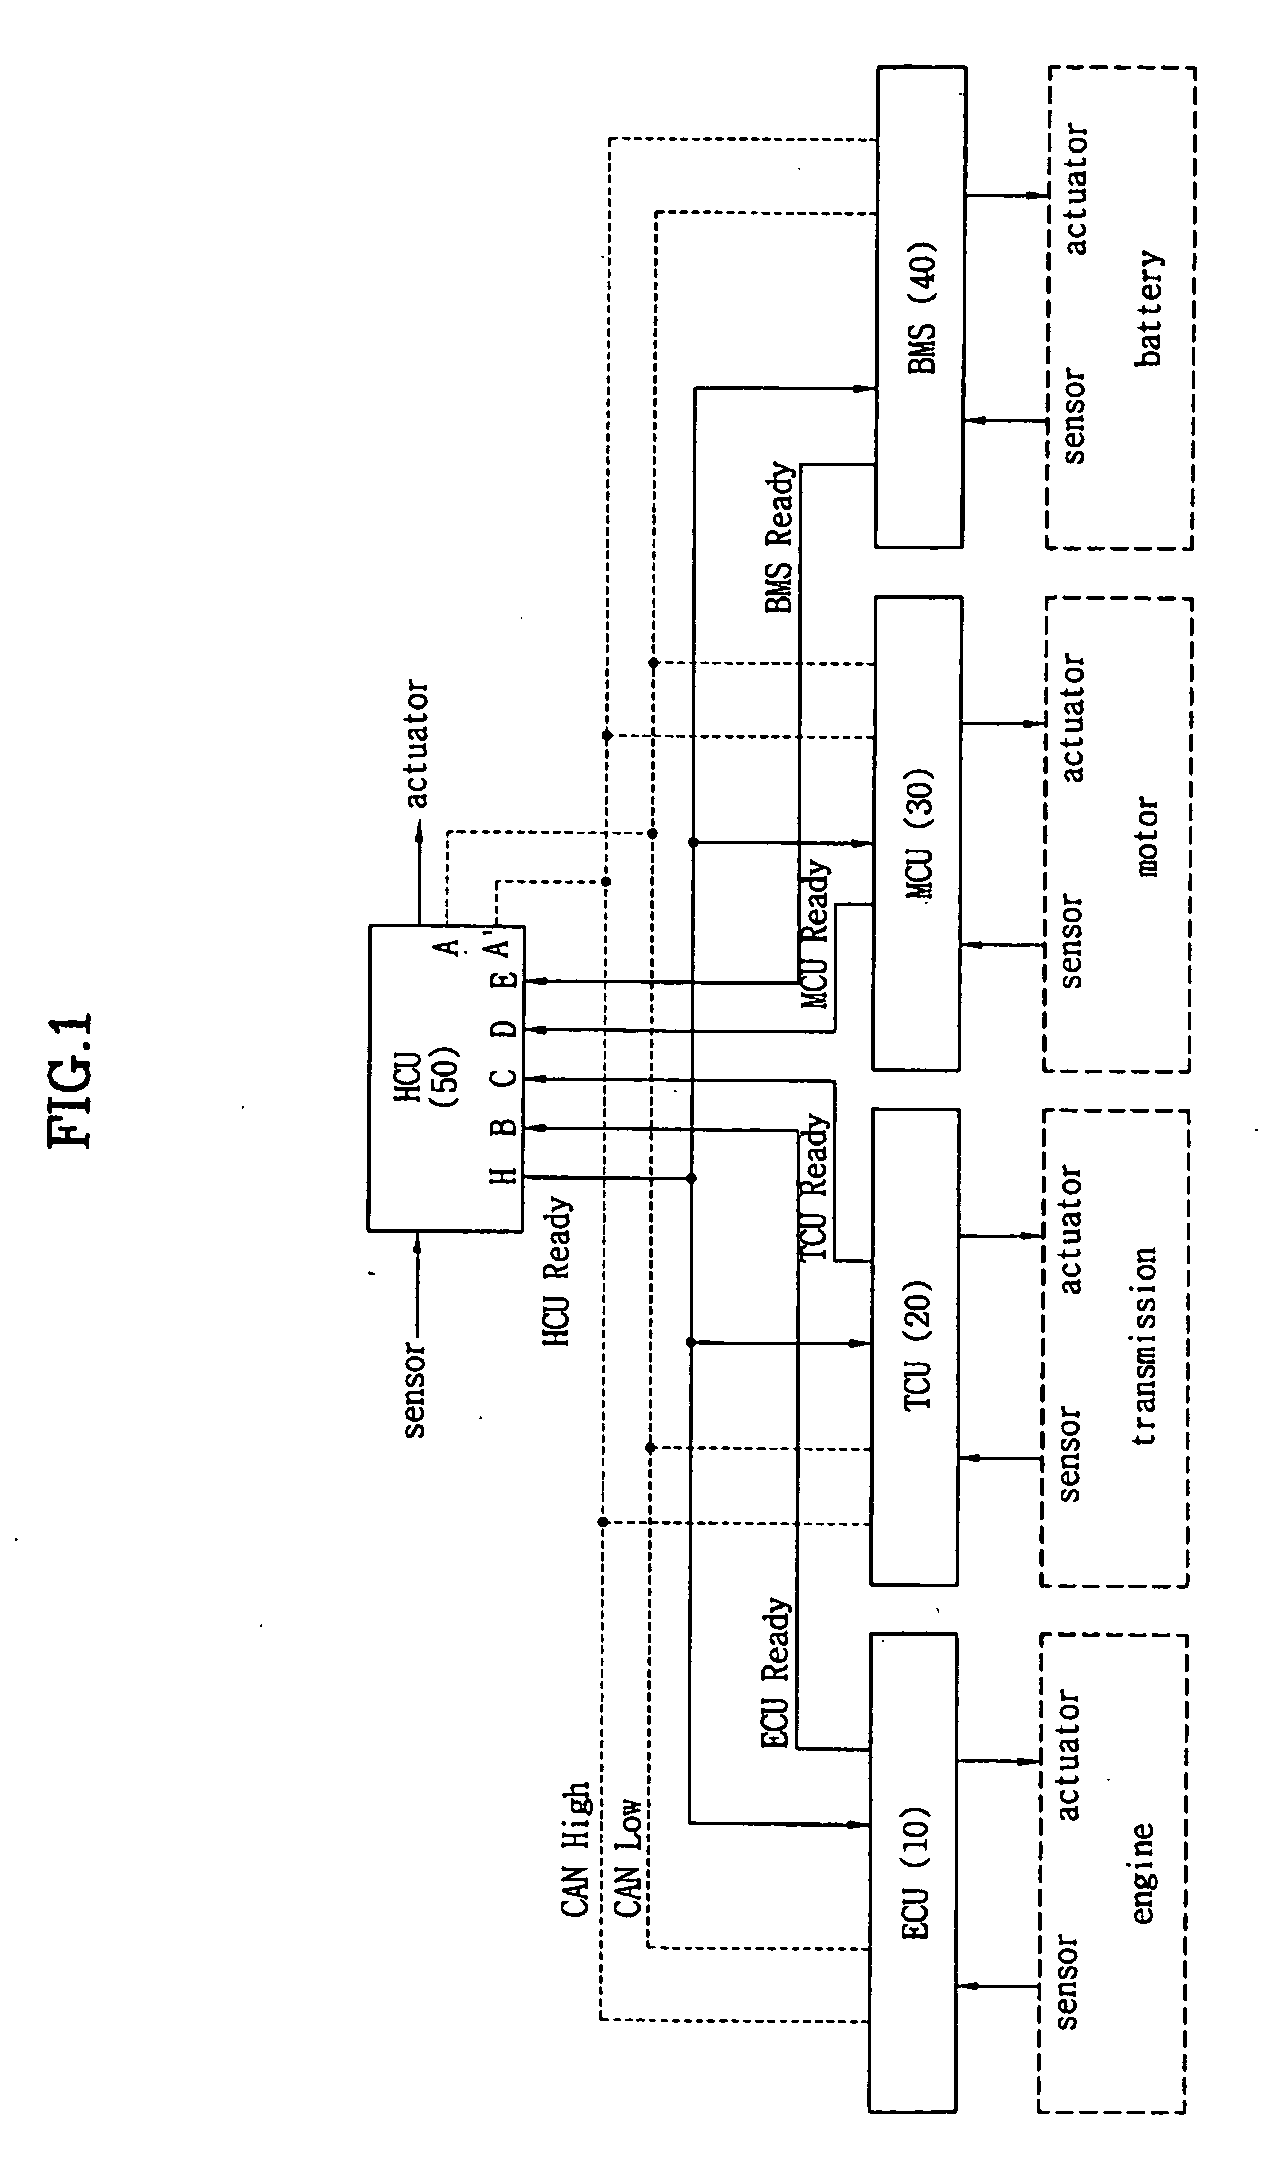 System for failure safety control between controllers of hybrid vehicle